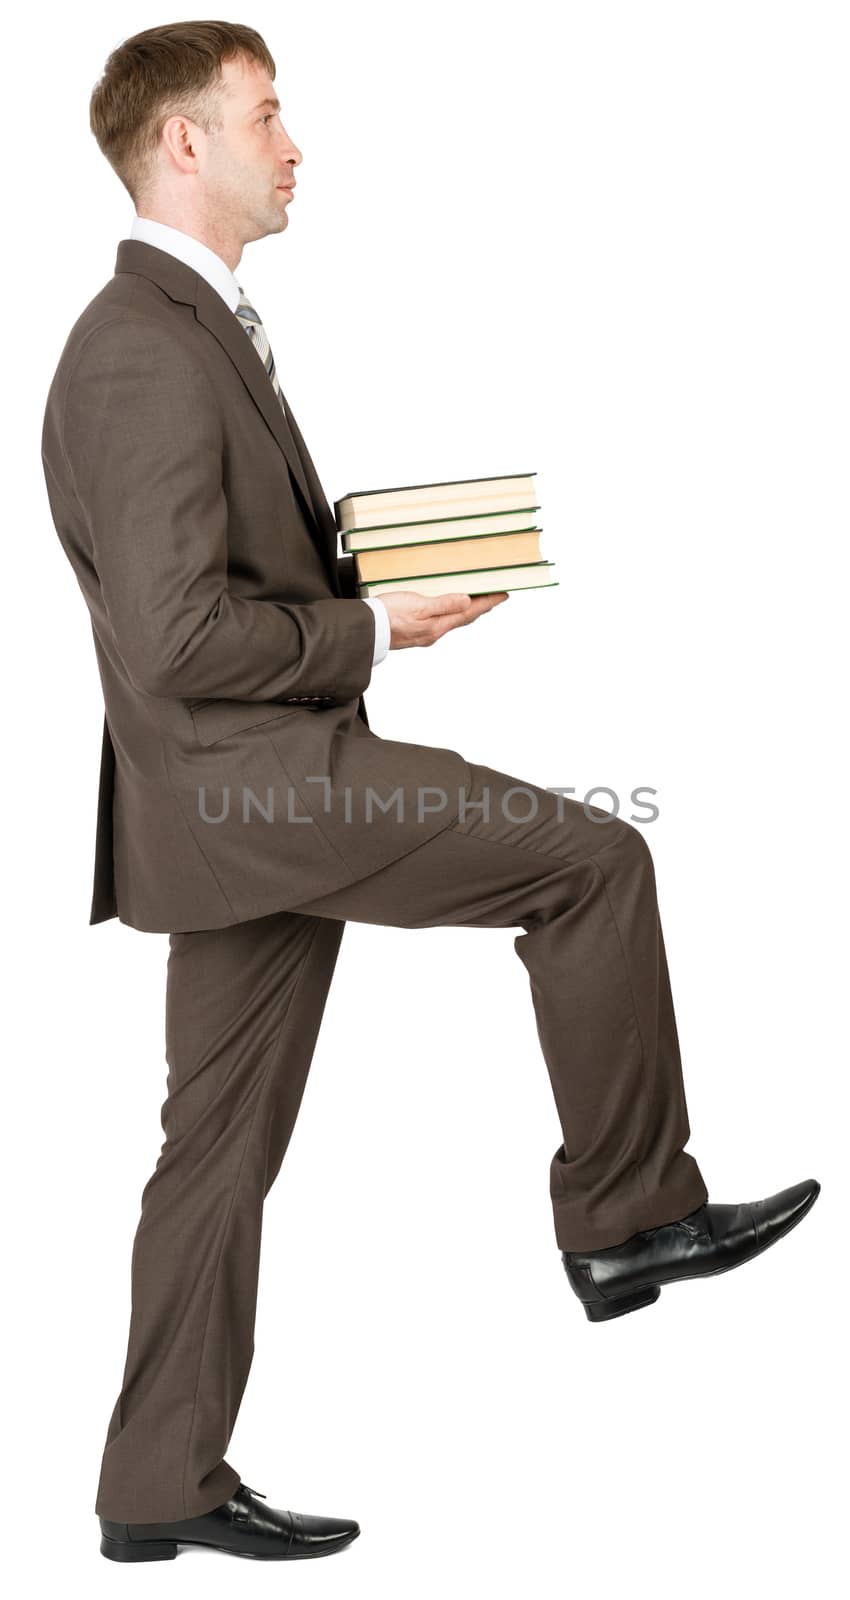 Walking  businessman with books isolated on white background